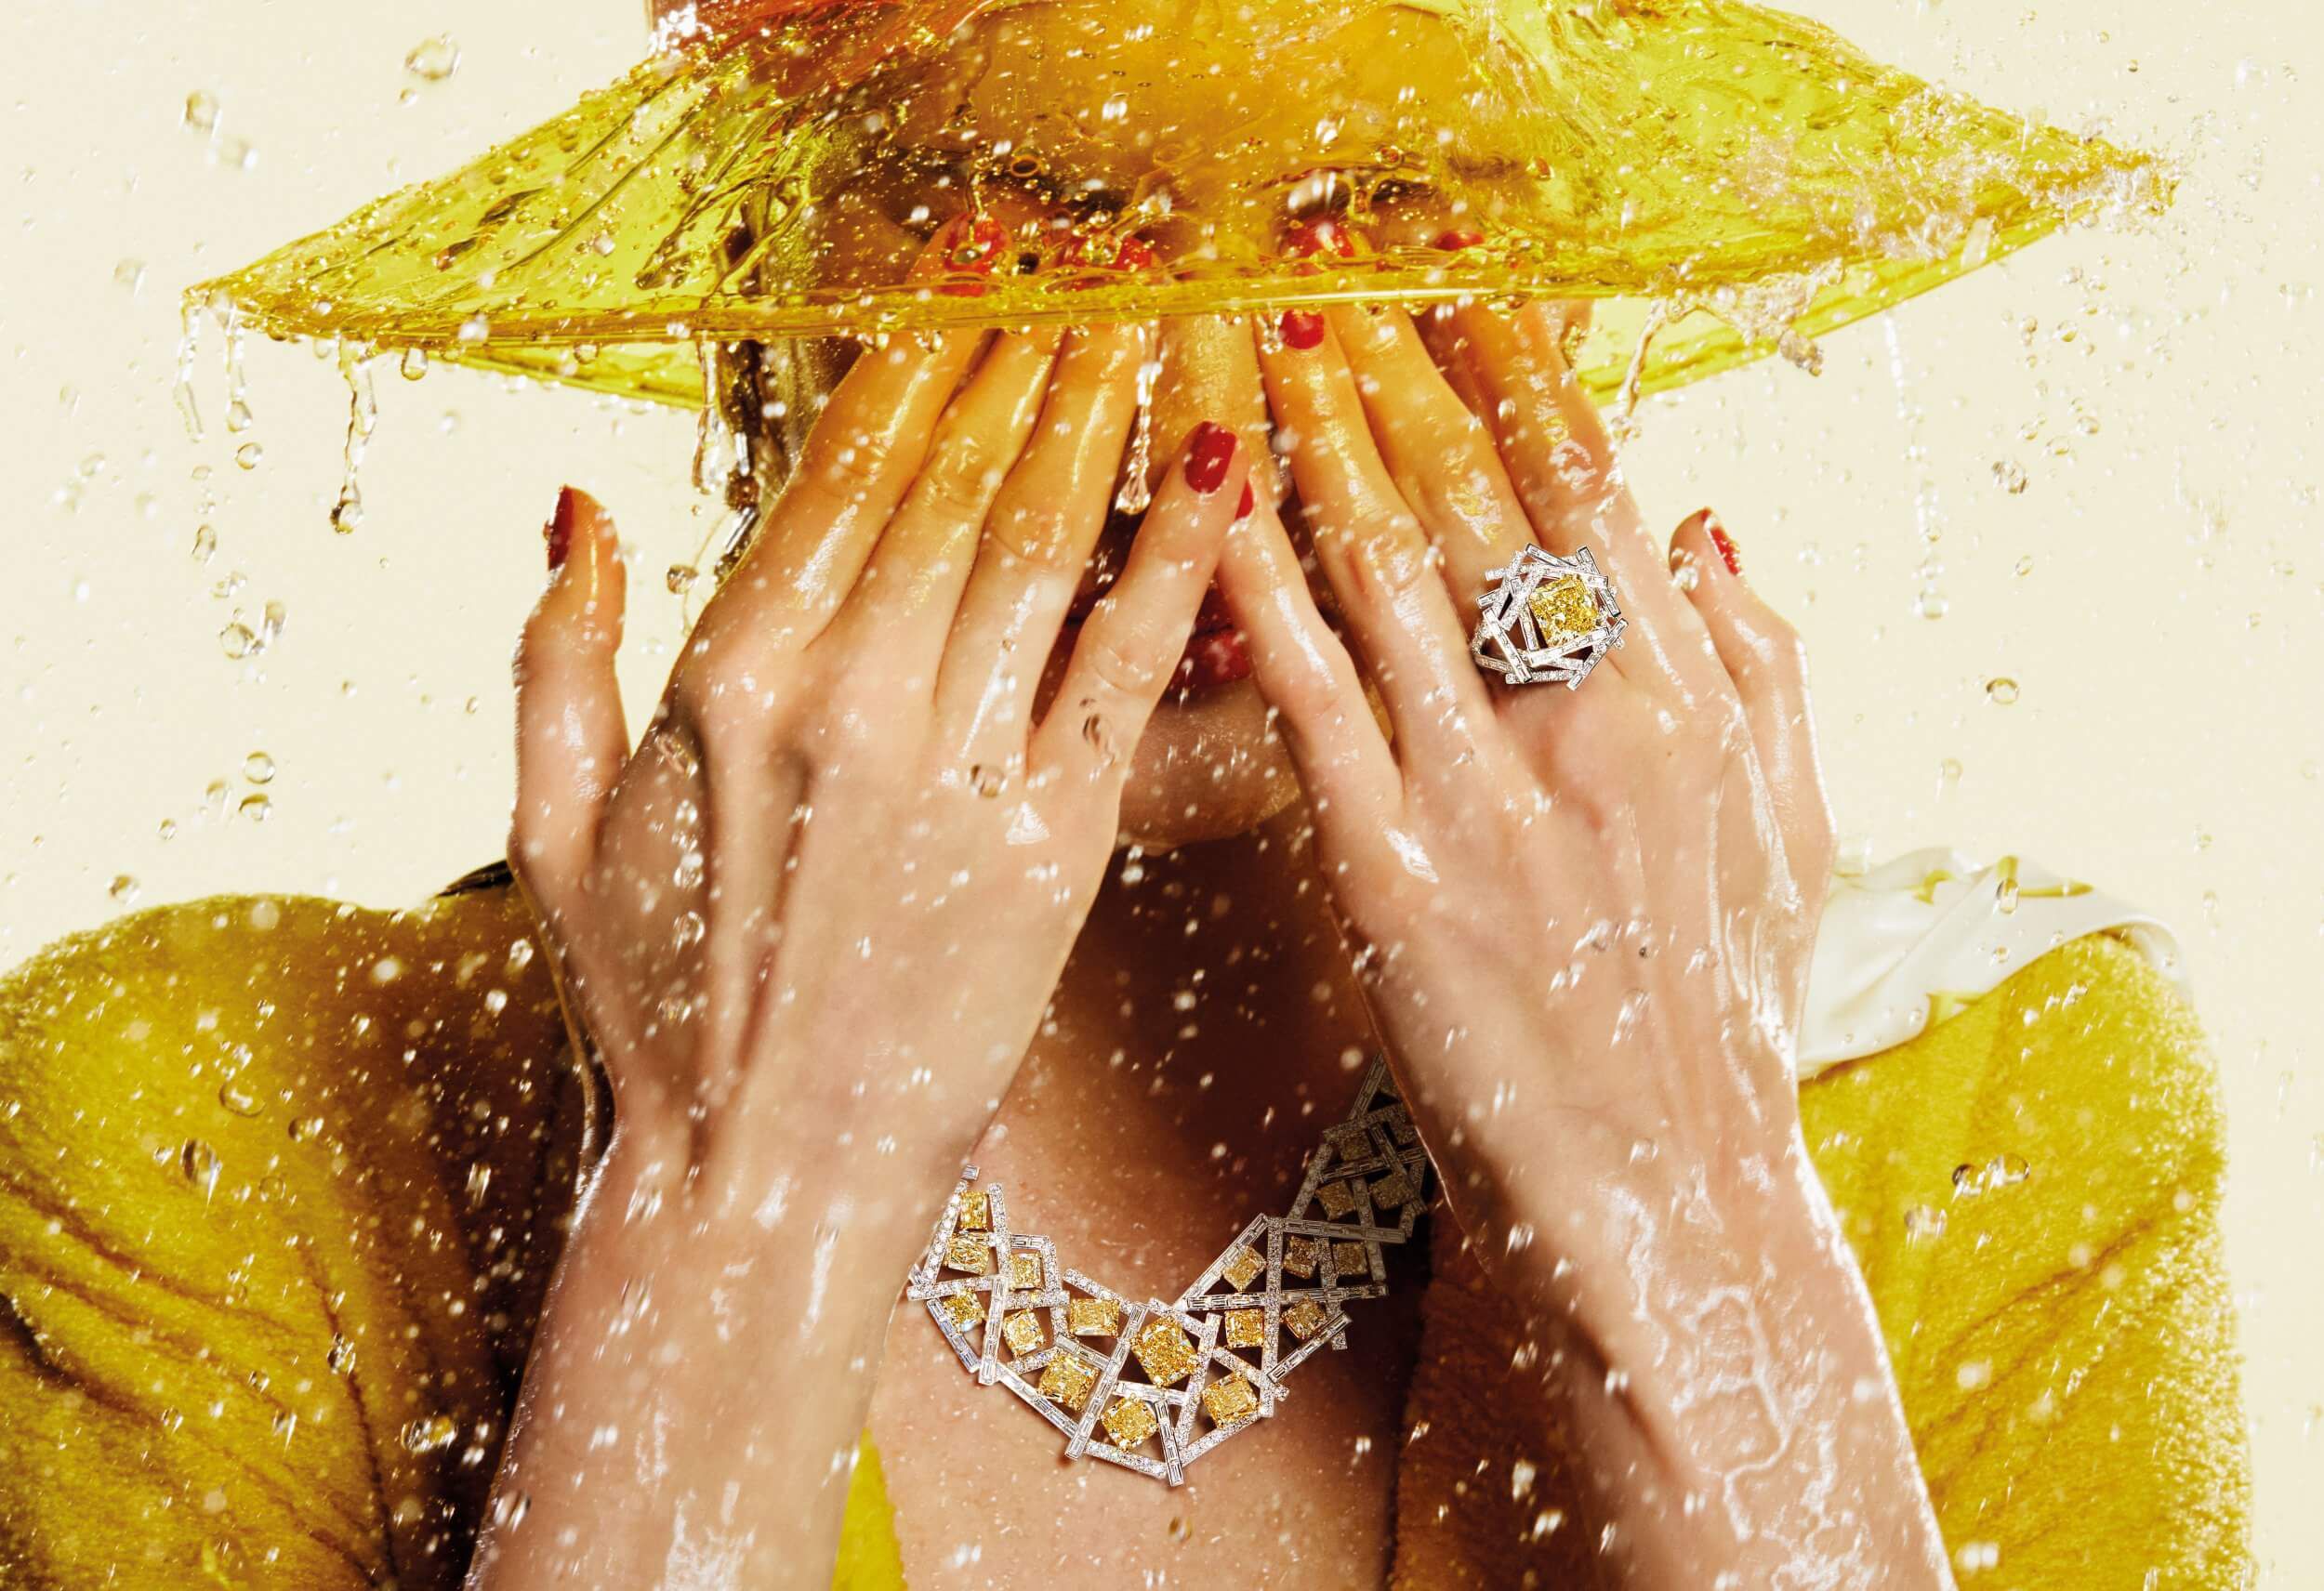 A model wearing Graff Threads Collection Yellow and White Diamond Ring and Necklace under rain